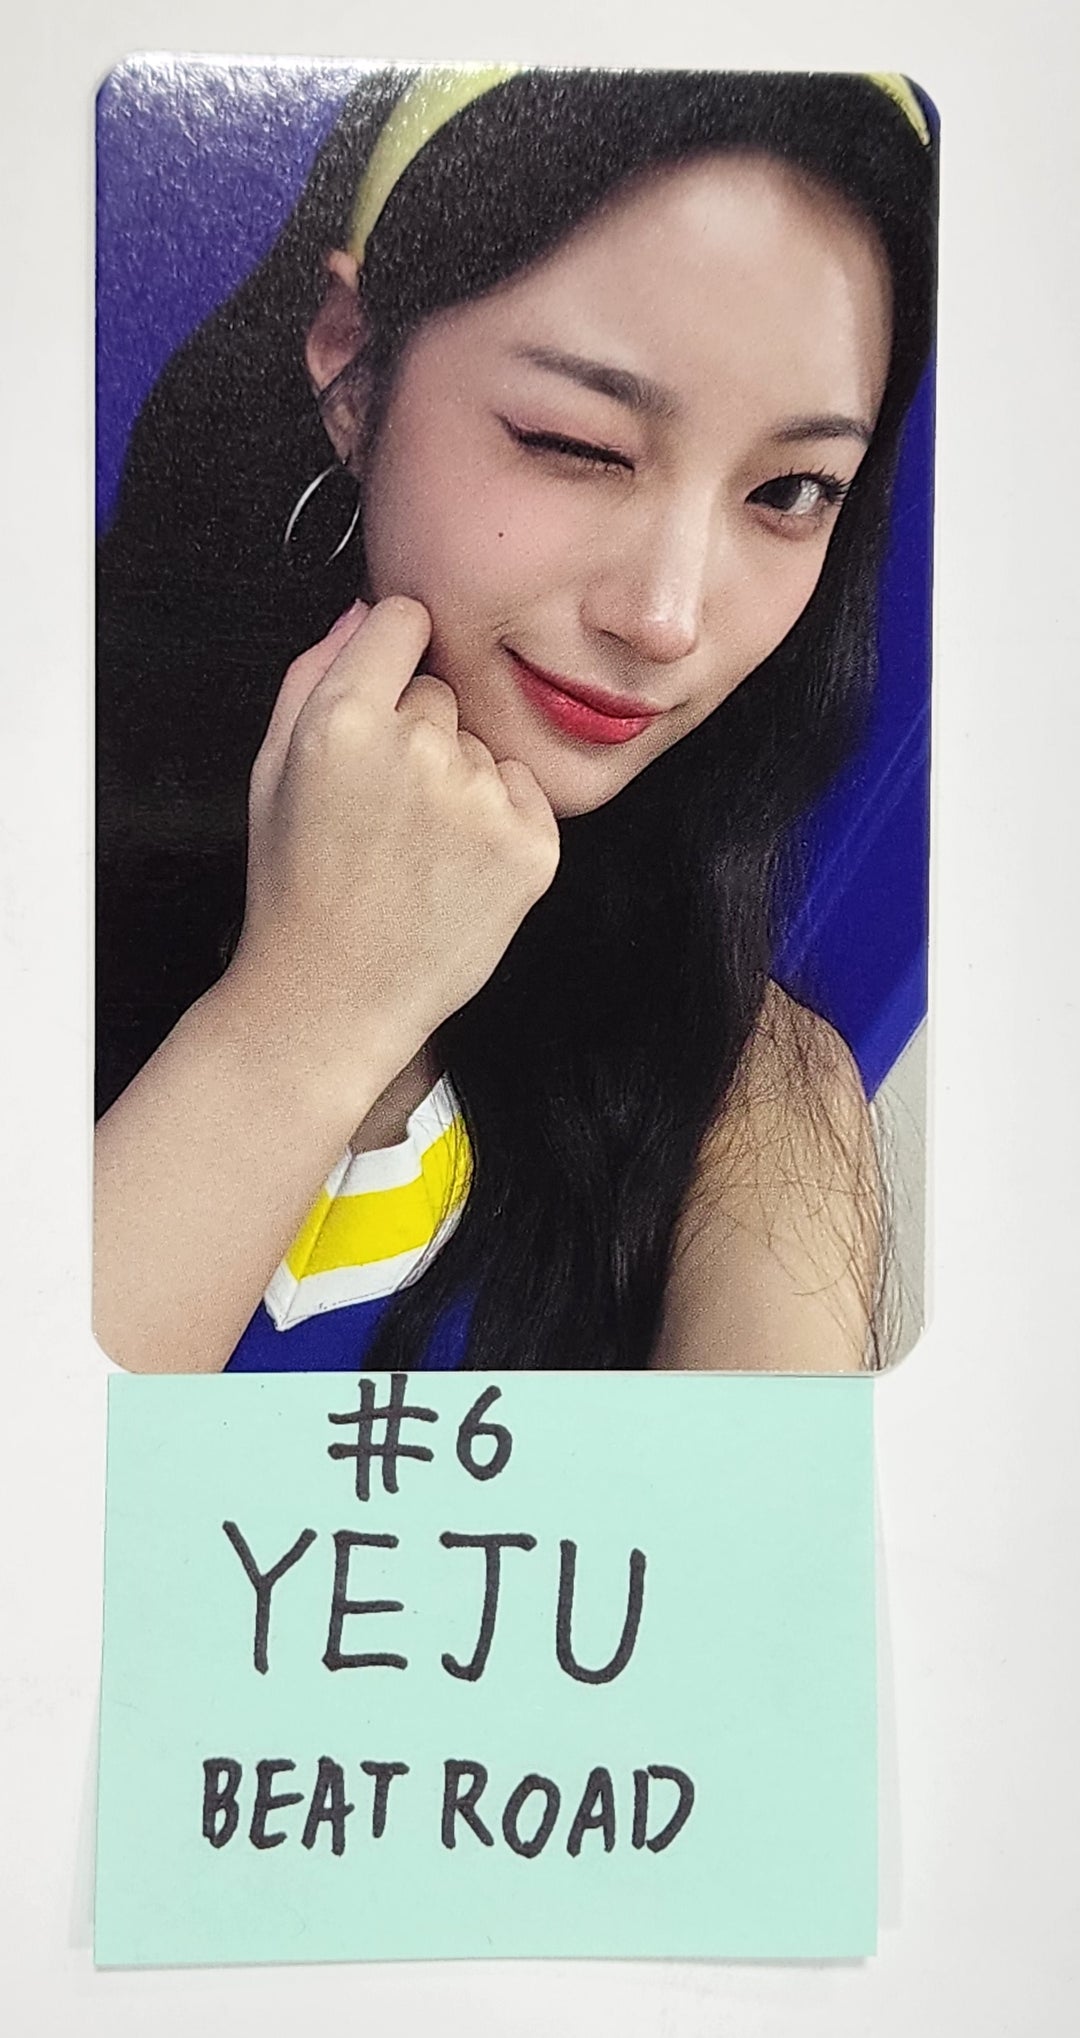 ICHILLIN' "I'M ON IT!" - Beatroad Fansign Event Photocard [23.08.28]